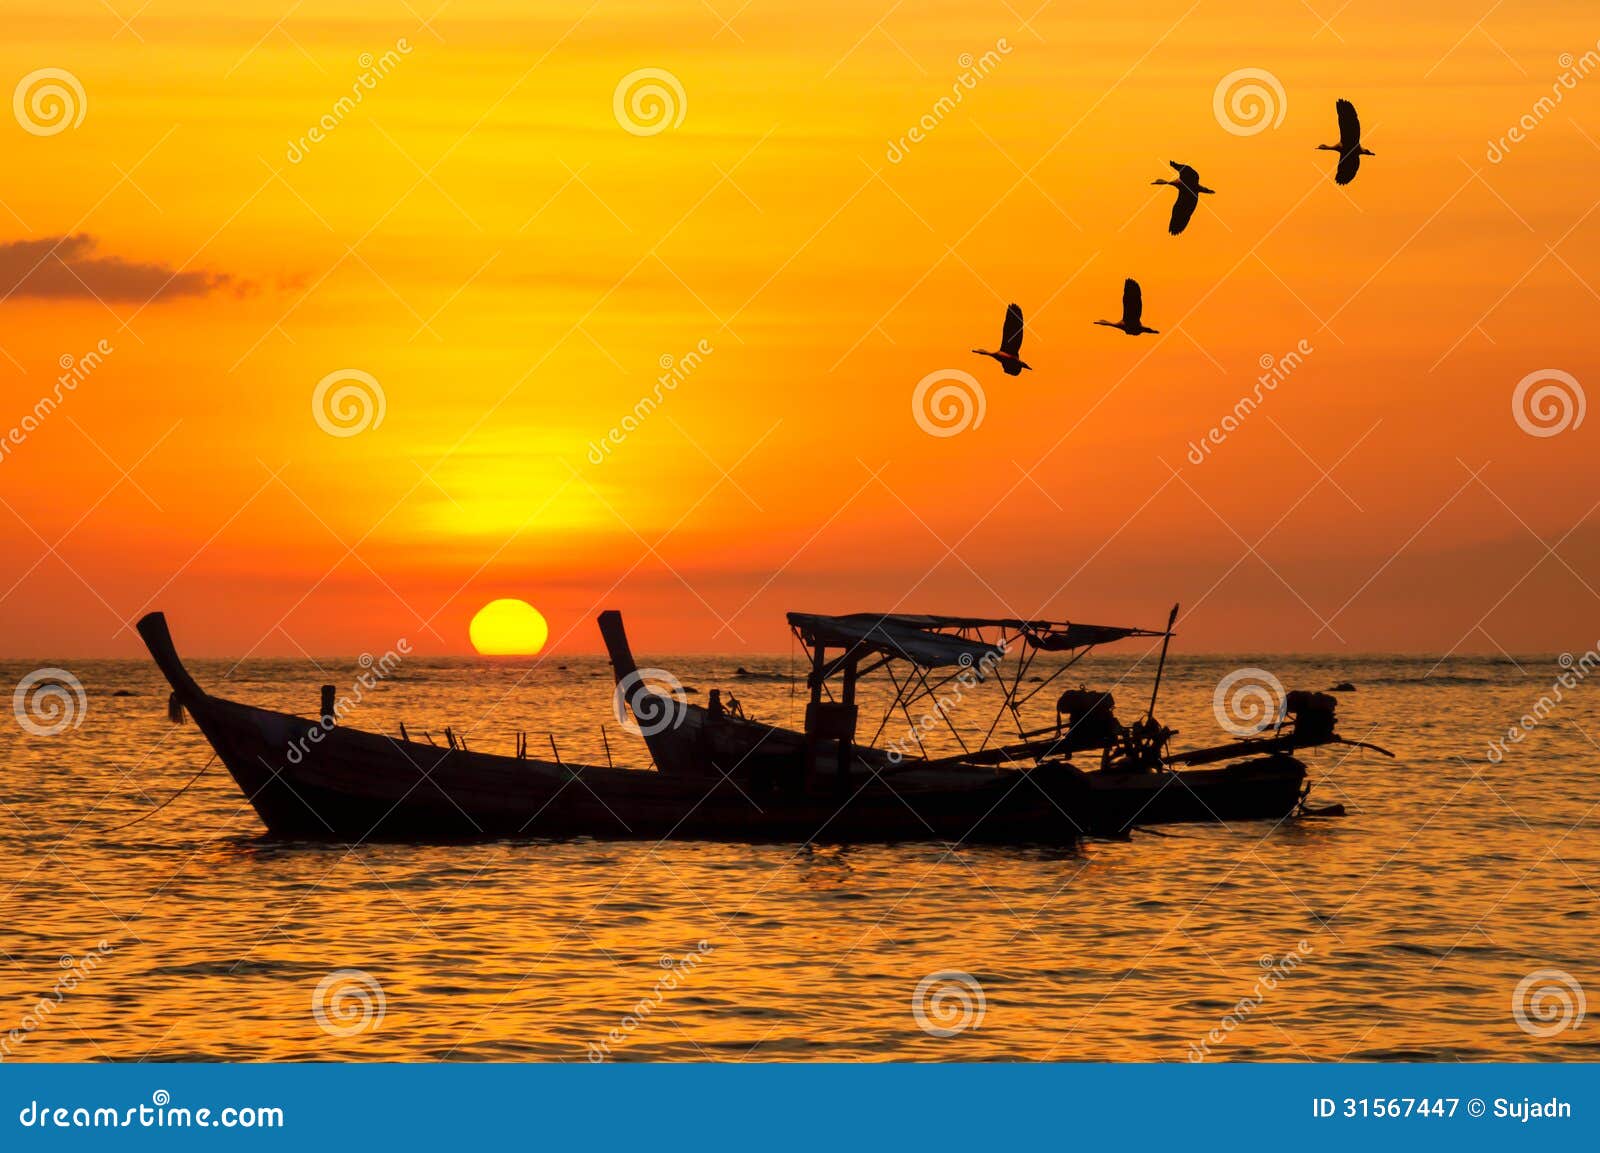 silhouette small fishing boat with birds and sunsets stock